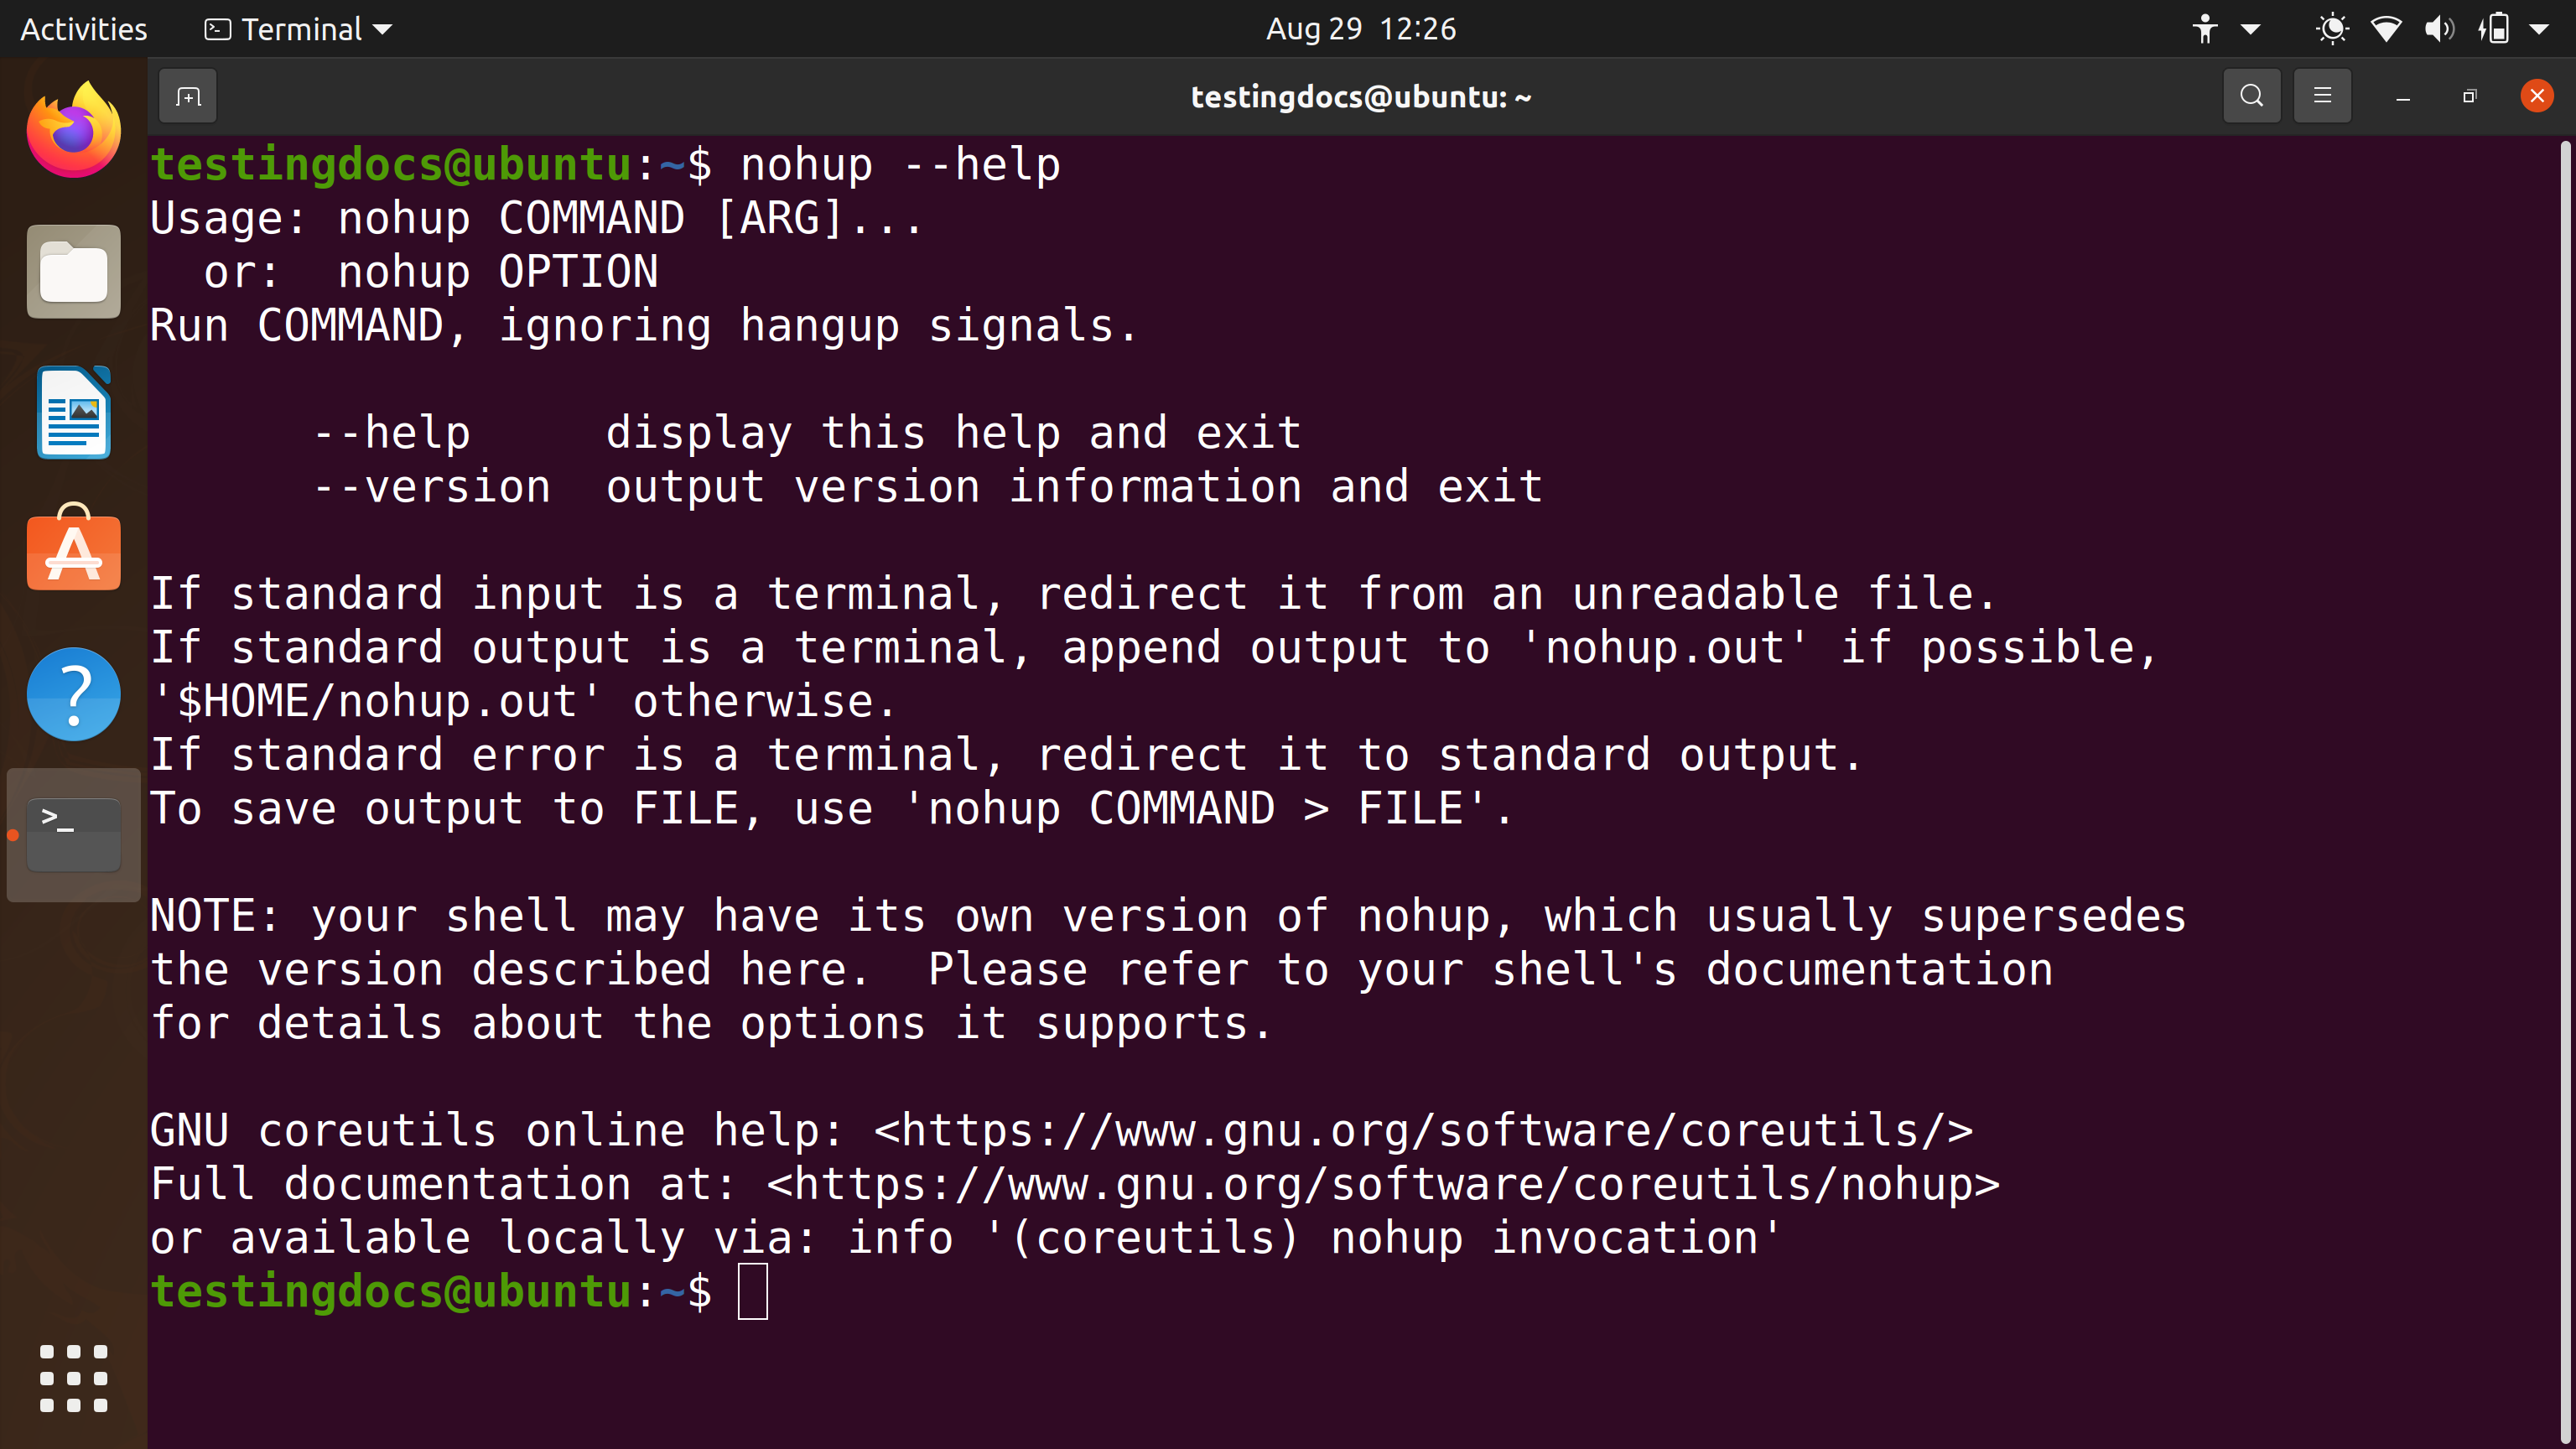 nohup linux command